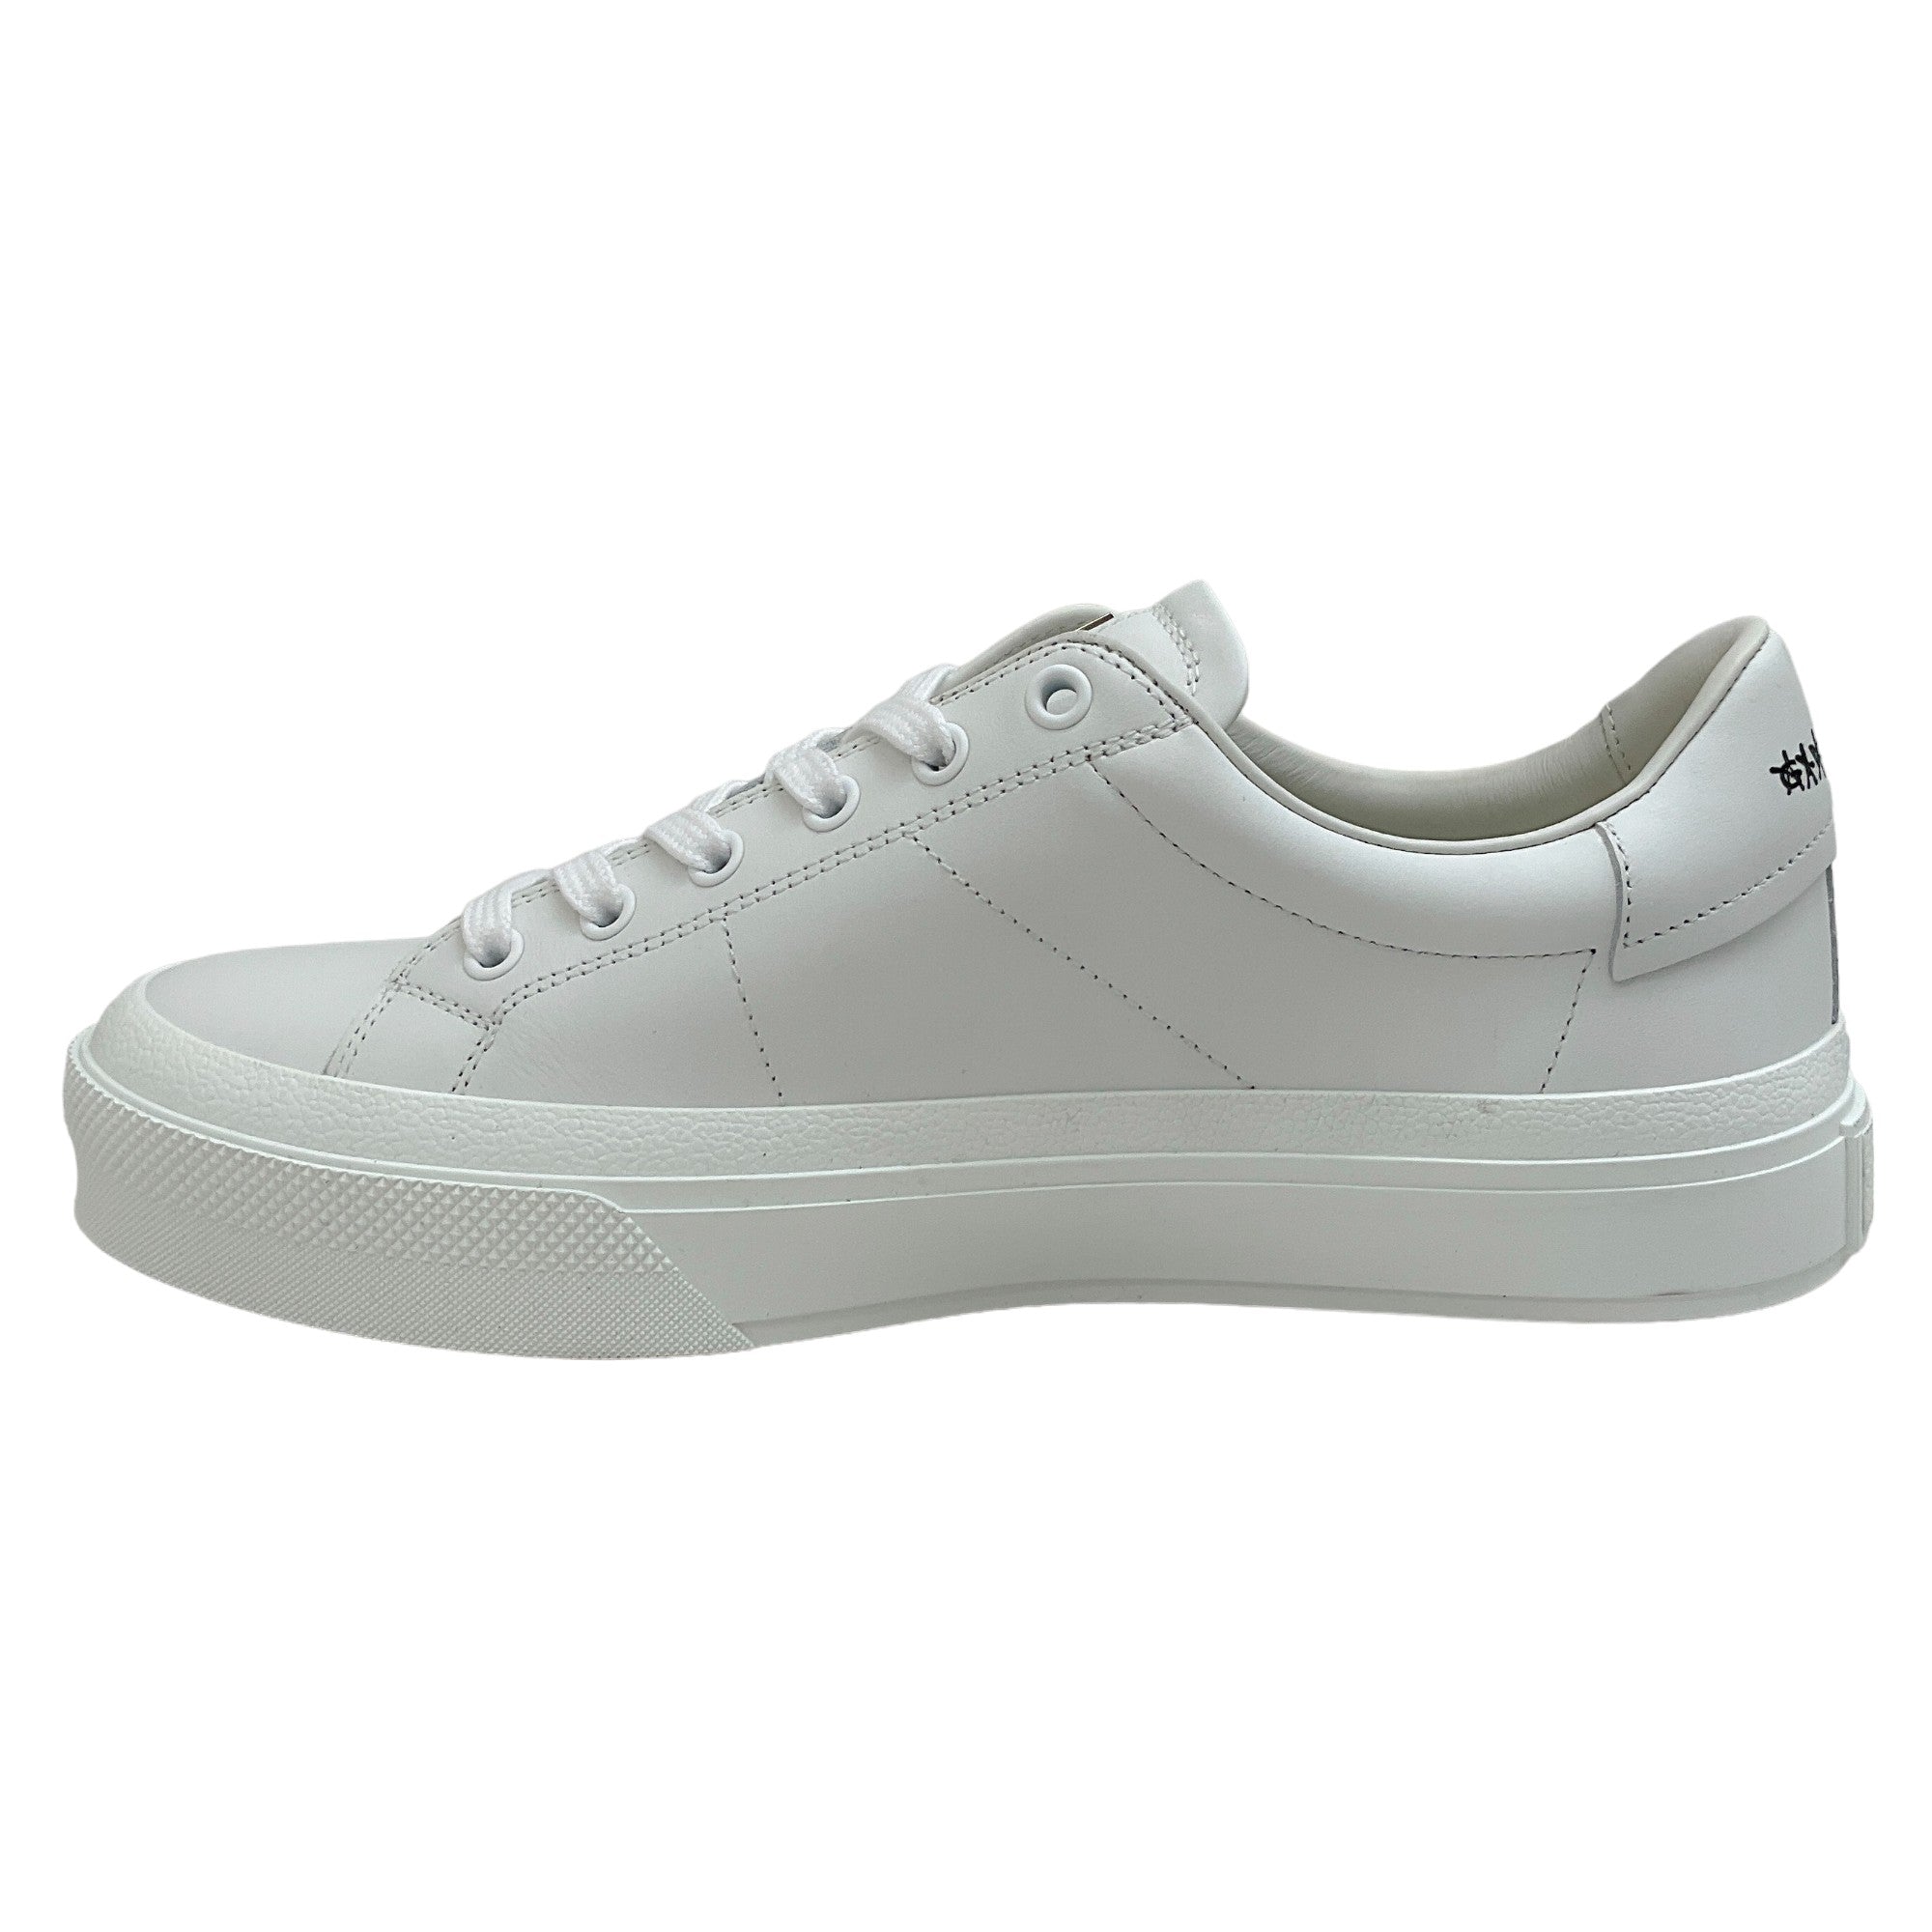 Givenchy White / Black City Sneakers